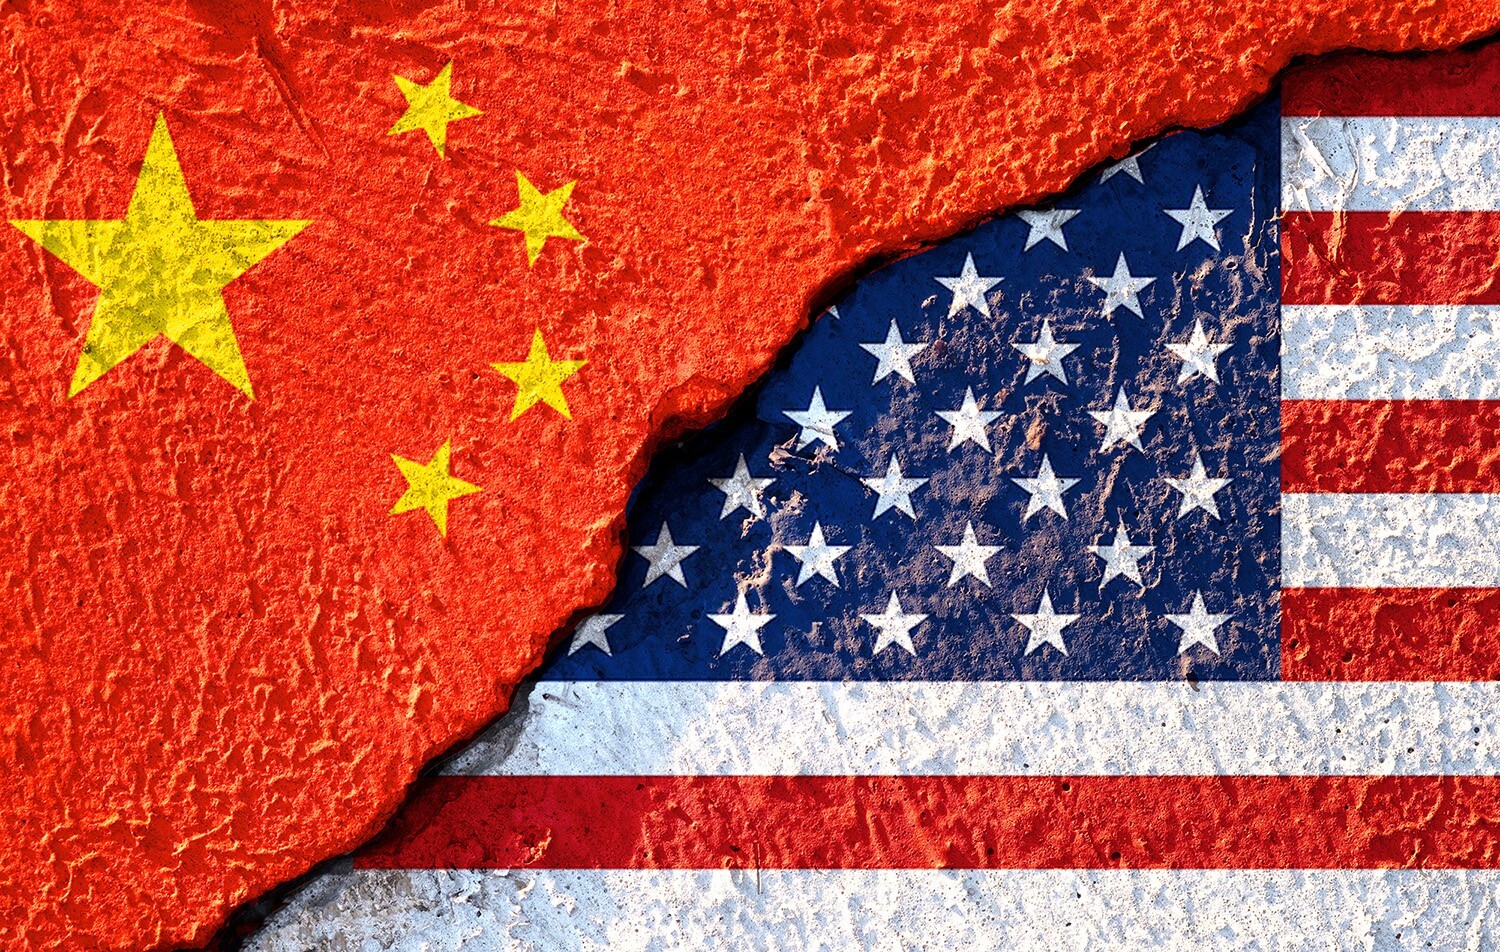 US researchers found that tariffs hurt the American economy and did not force China to change its policies. Photo: Shutterstock